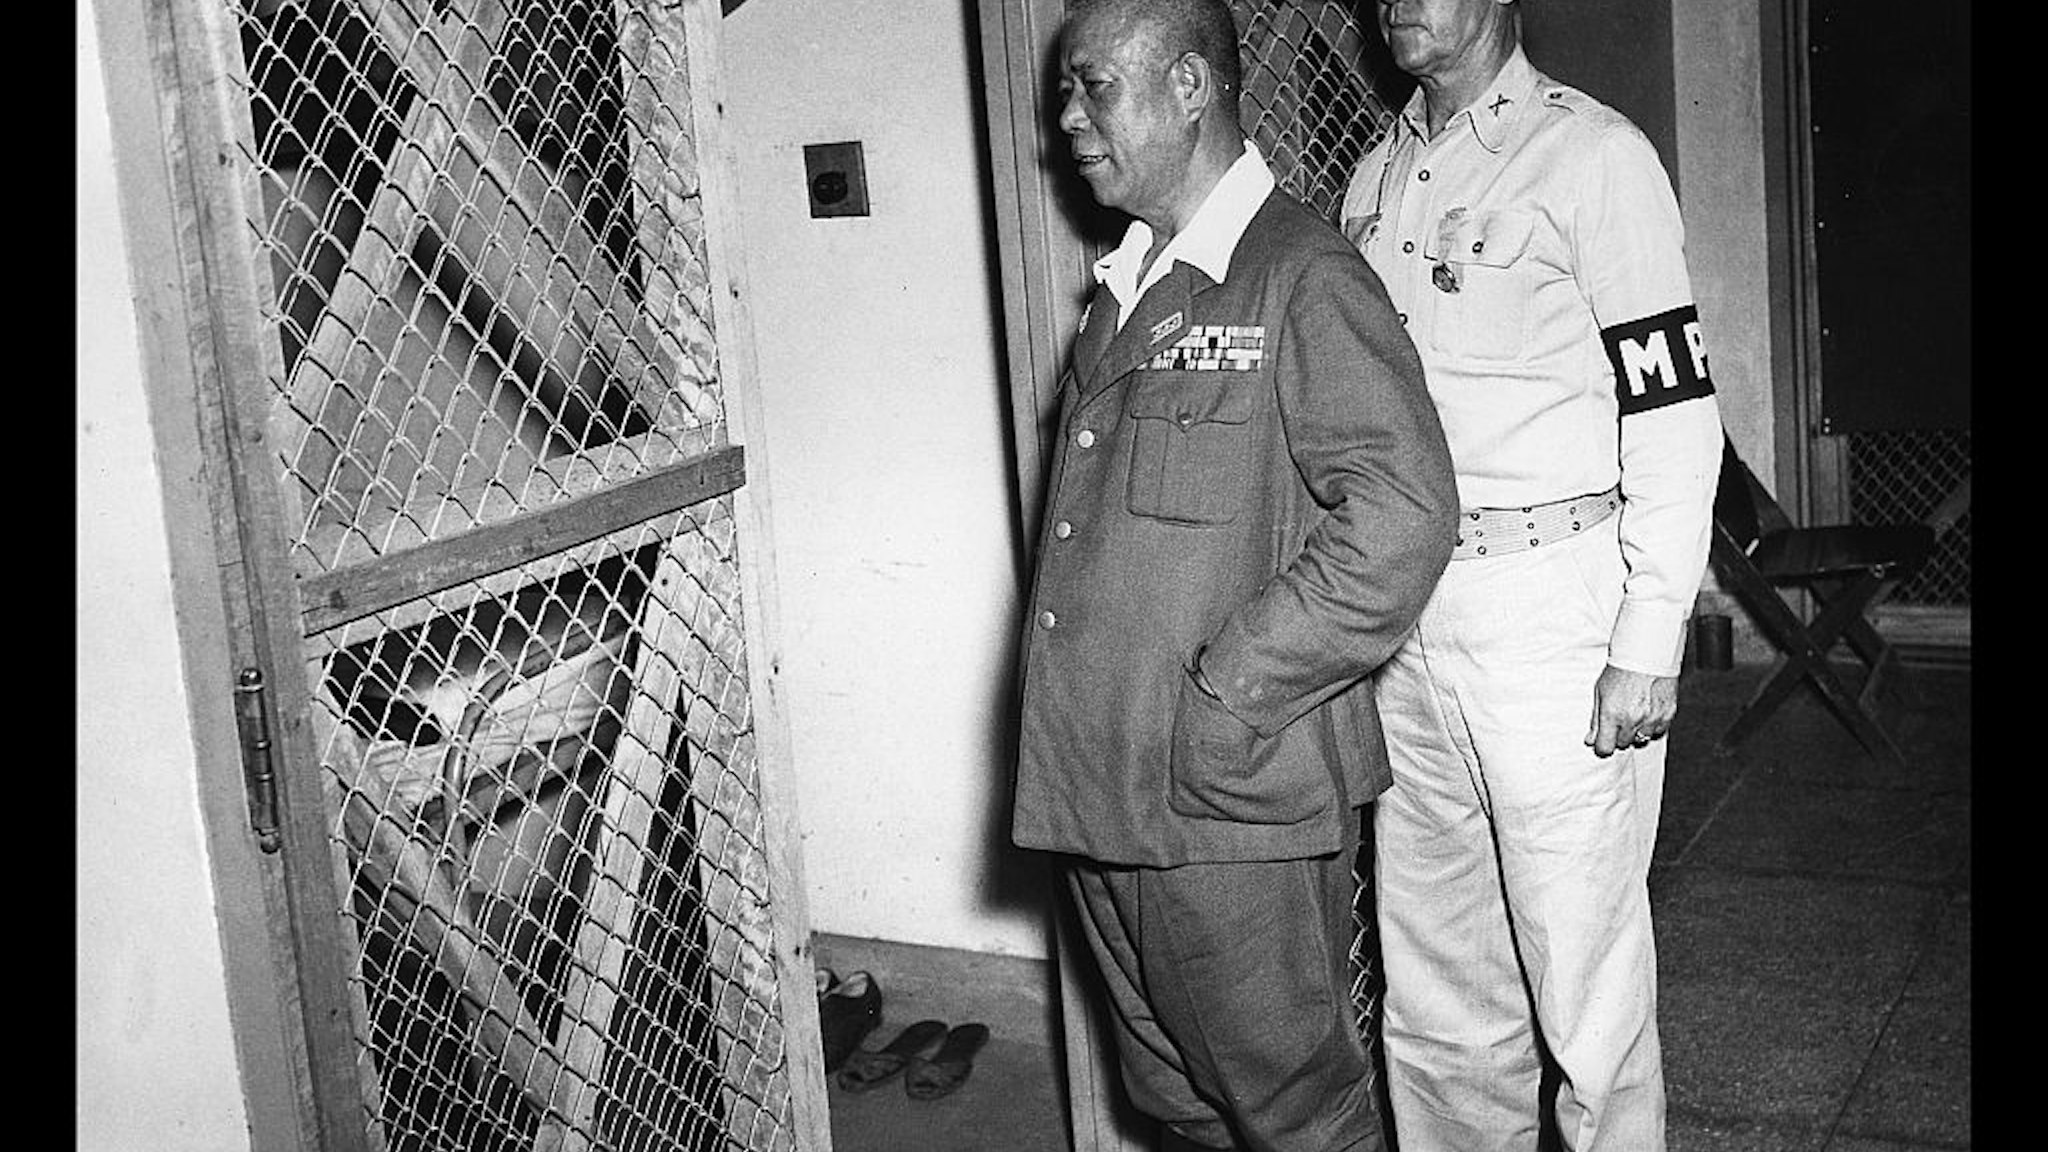 War Crimes Trials Manila in the Philippines, after world war two, 1946. Japanese General Tomoyuki Yamashita, guarded by military police.